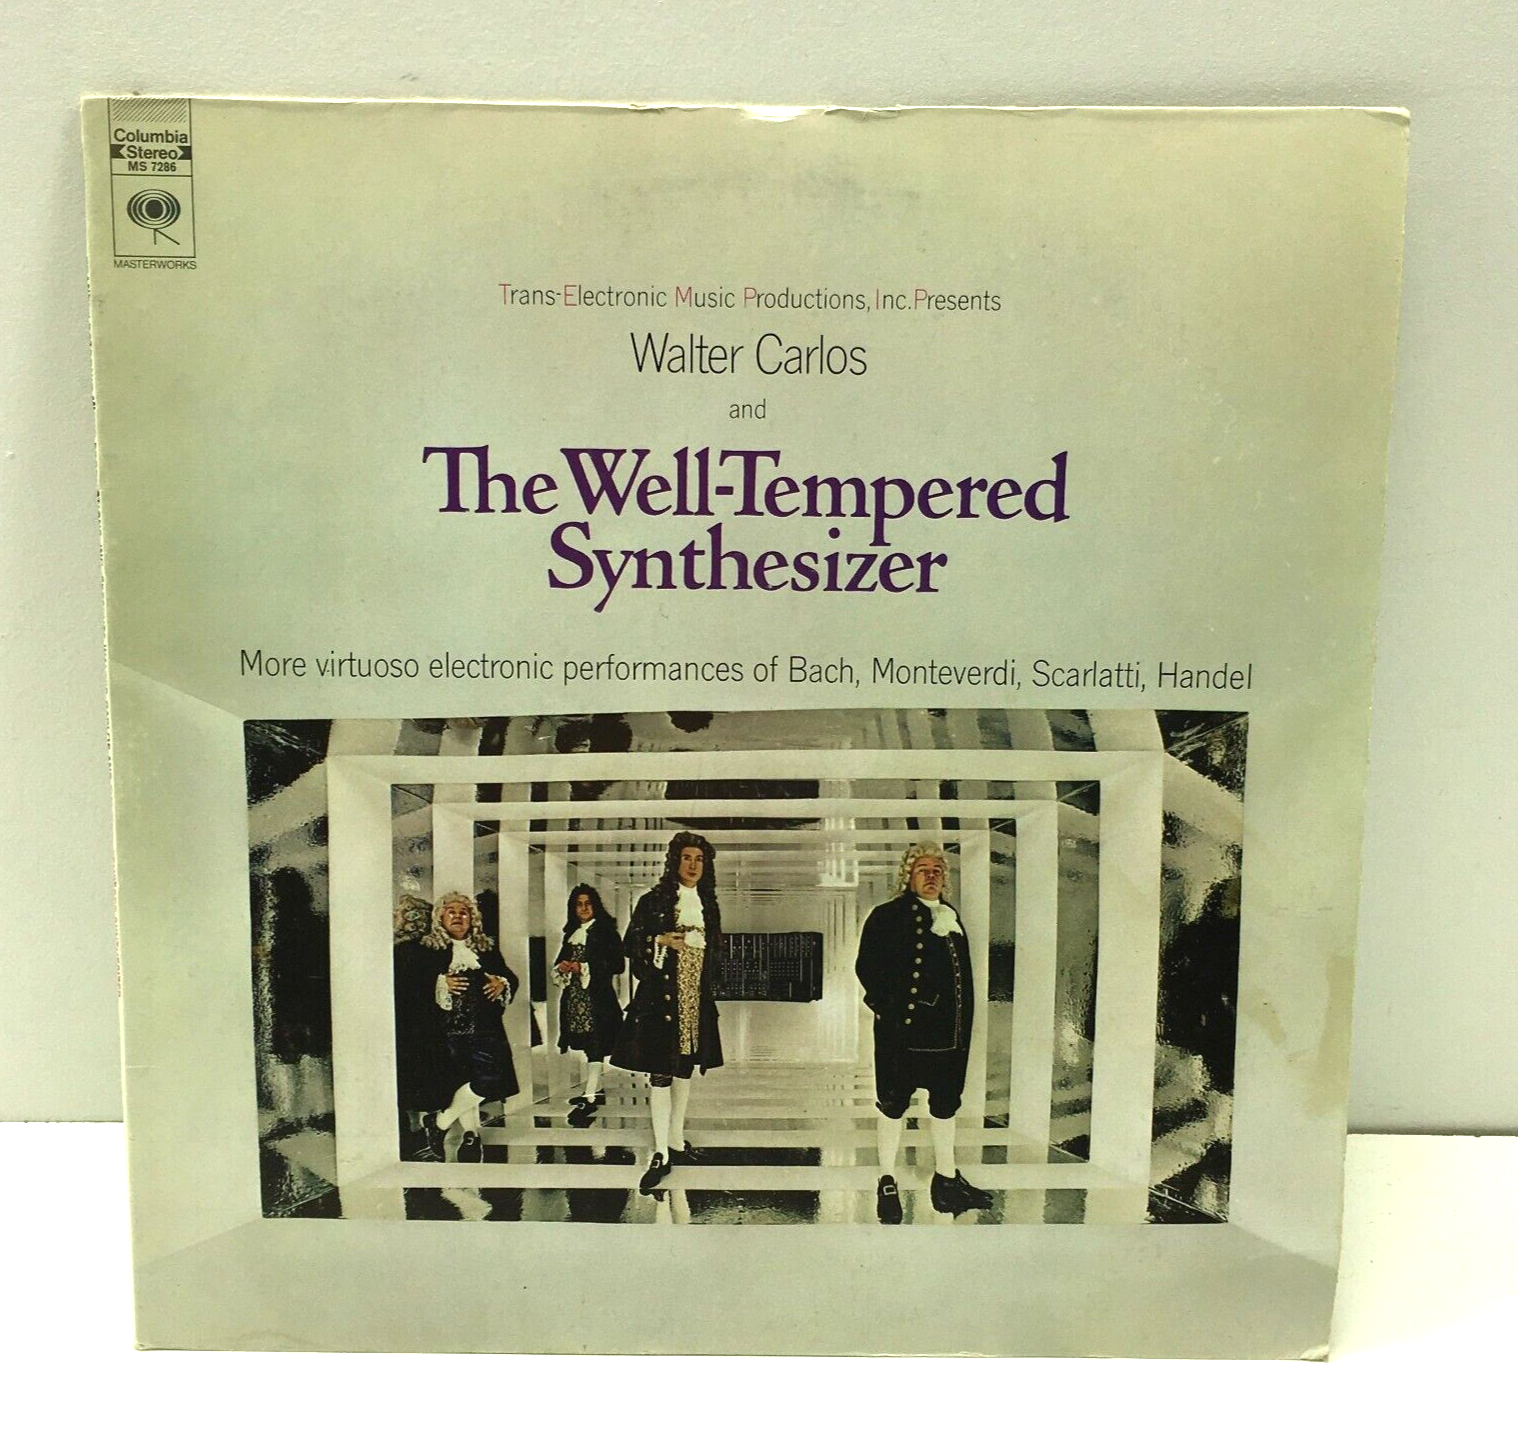 The Well-Tempered Synthesizer Wendy Walter Carlos Columbia MS7286 Record